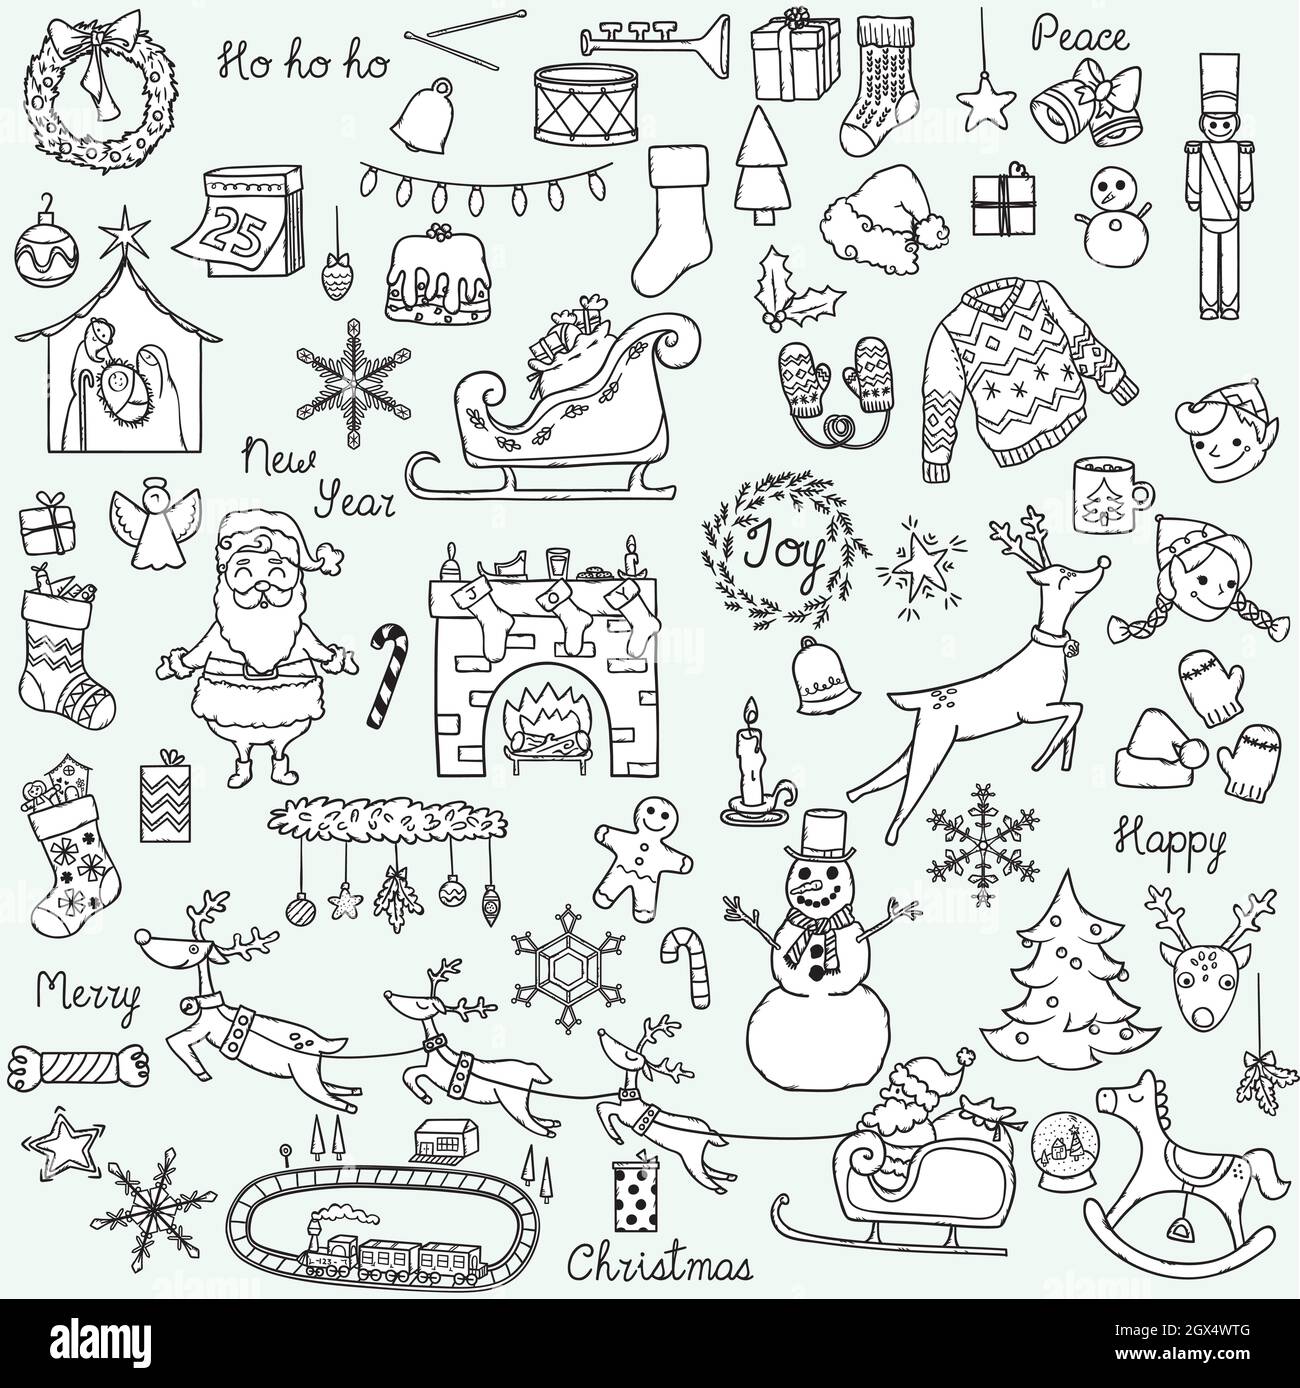 Hand Drawn Christmas doodles. Holiday cake, gifts, tree, Santa, reindeers, elf, ornament, fireplace. Winter New Year Party. Black and white. Stock Vector